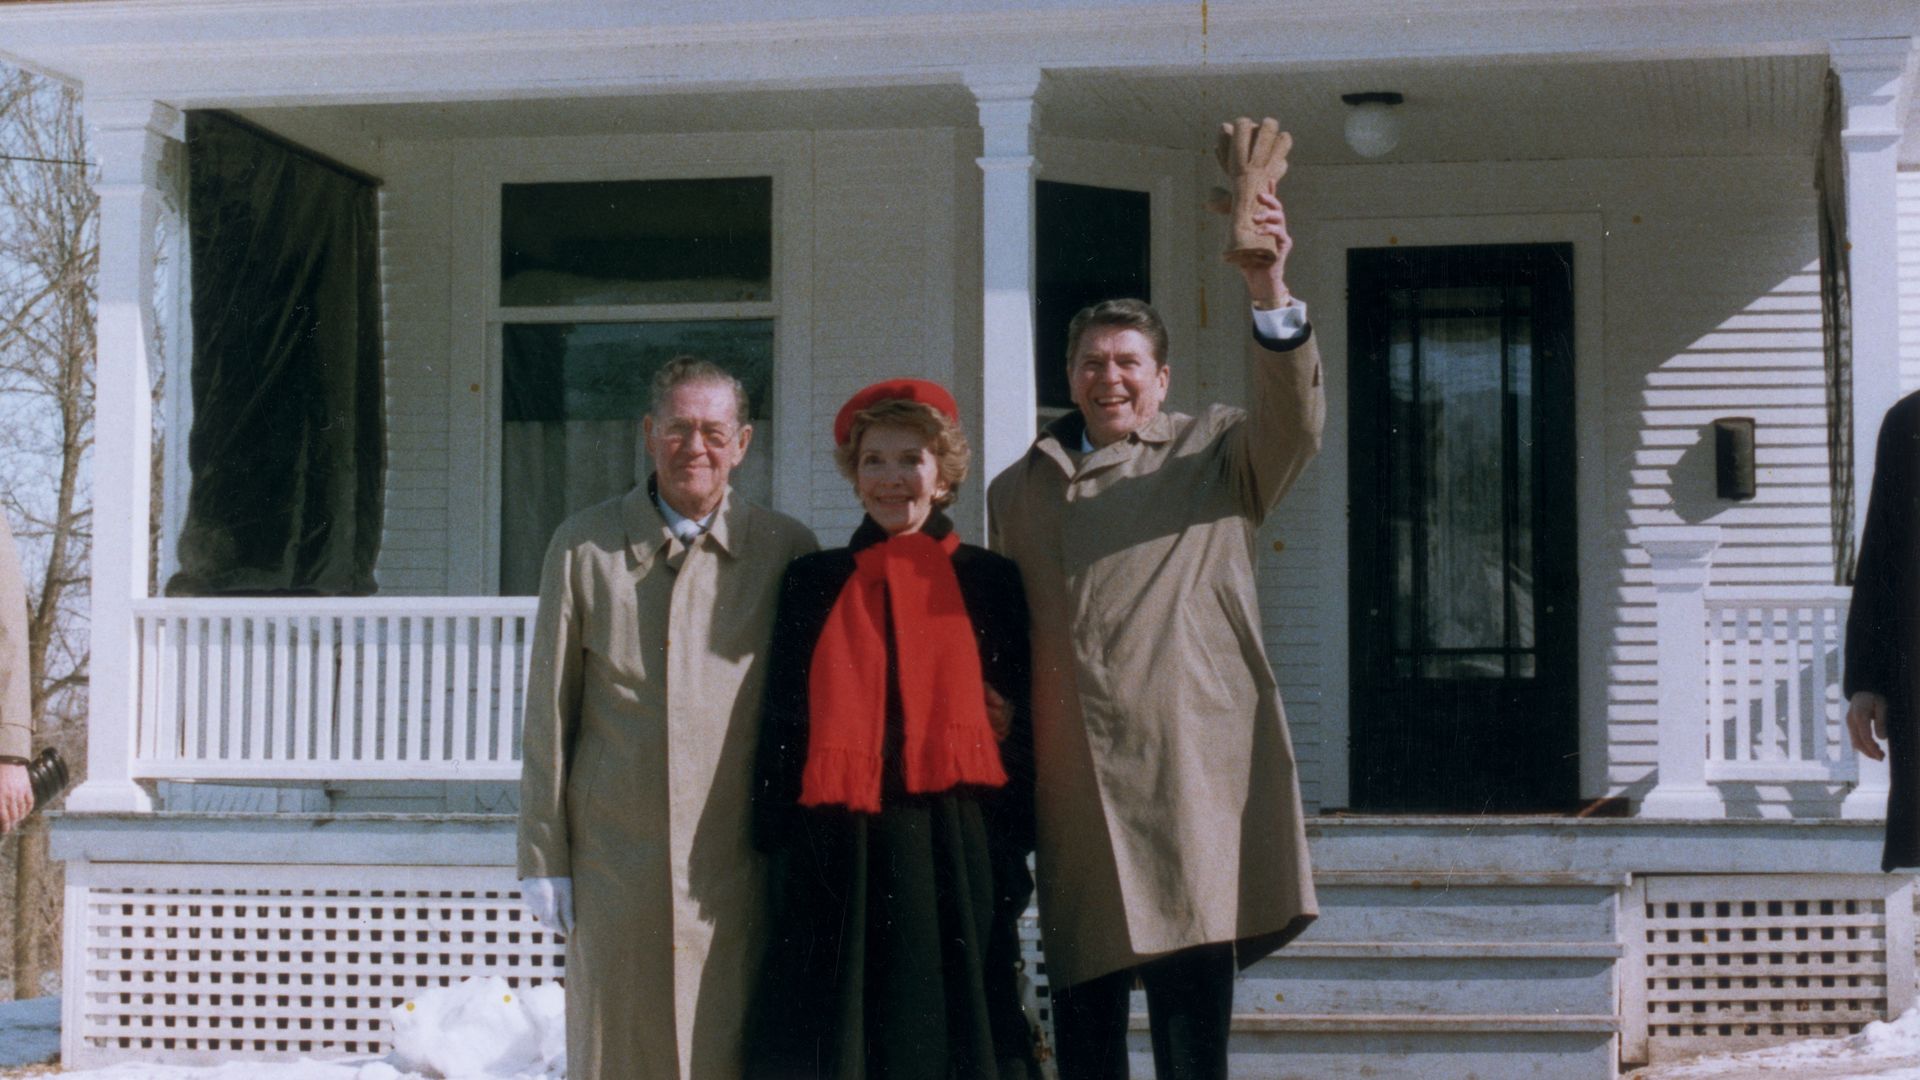 President Reagan, First Lady Nancy Reagan and his brother, Neil, visit the Reagans' boyhood home in 1984.